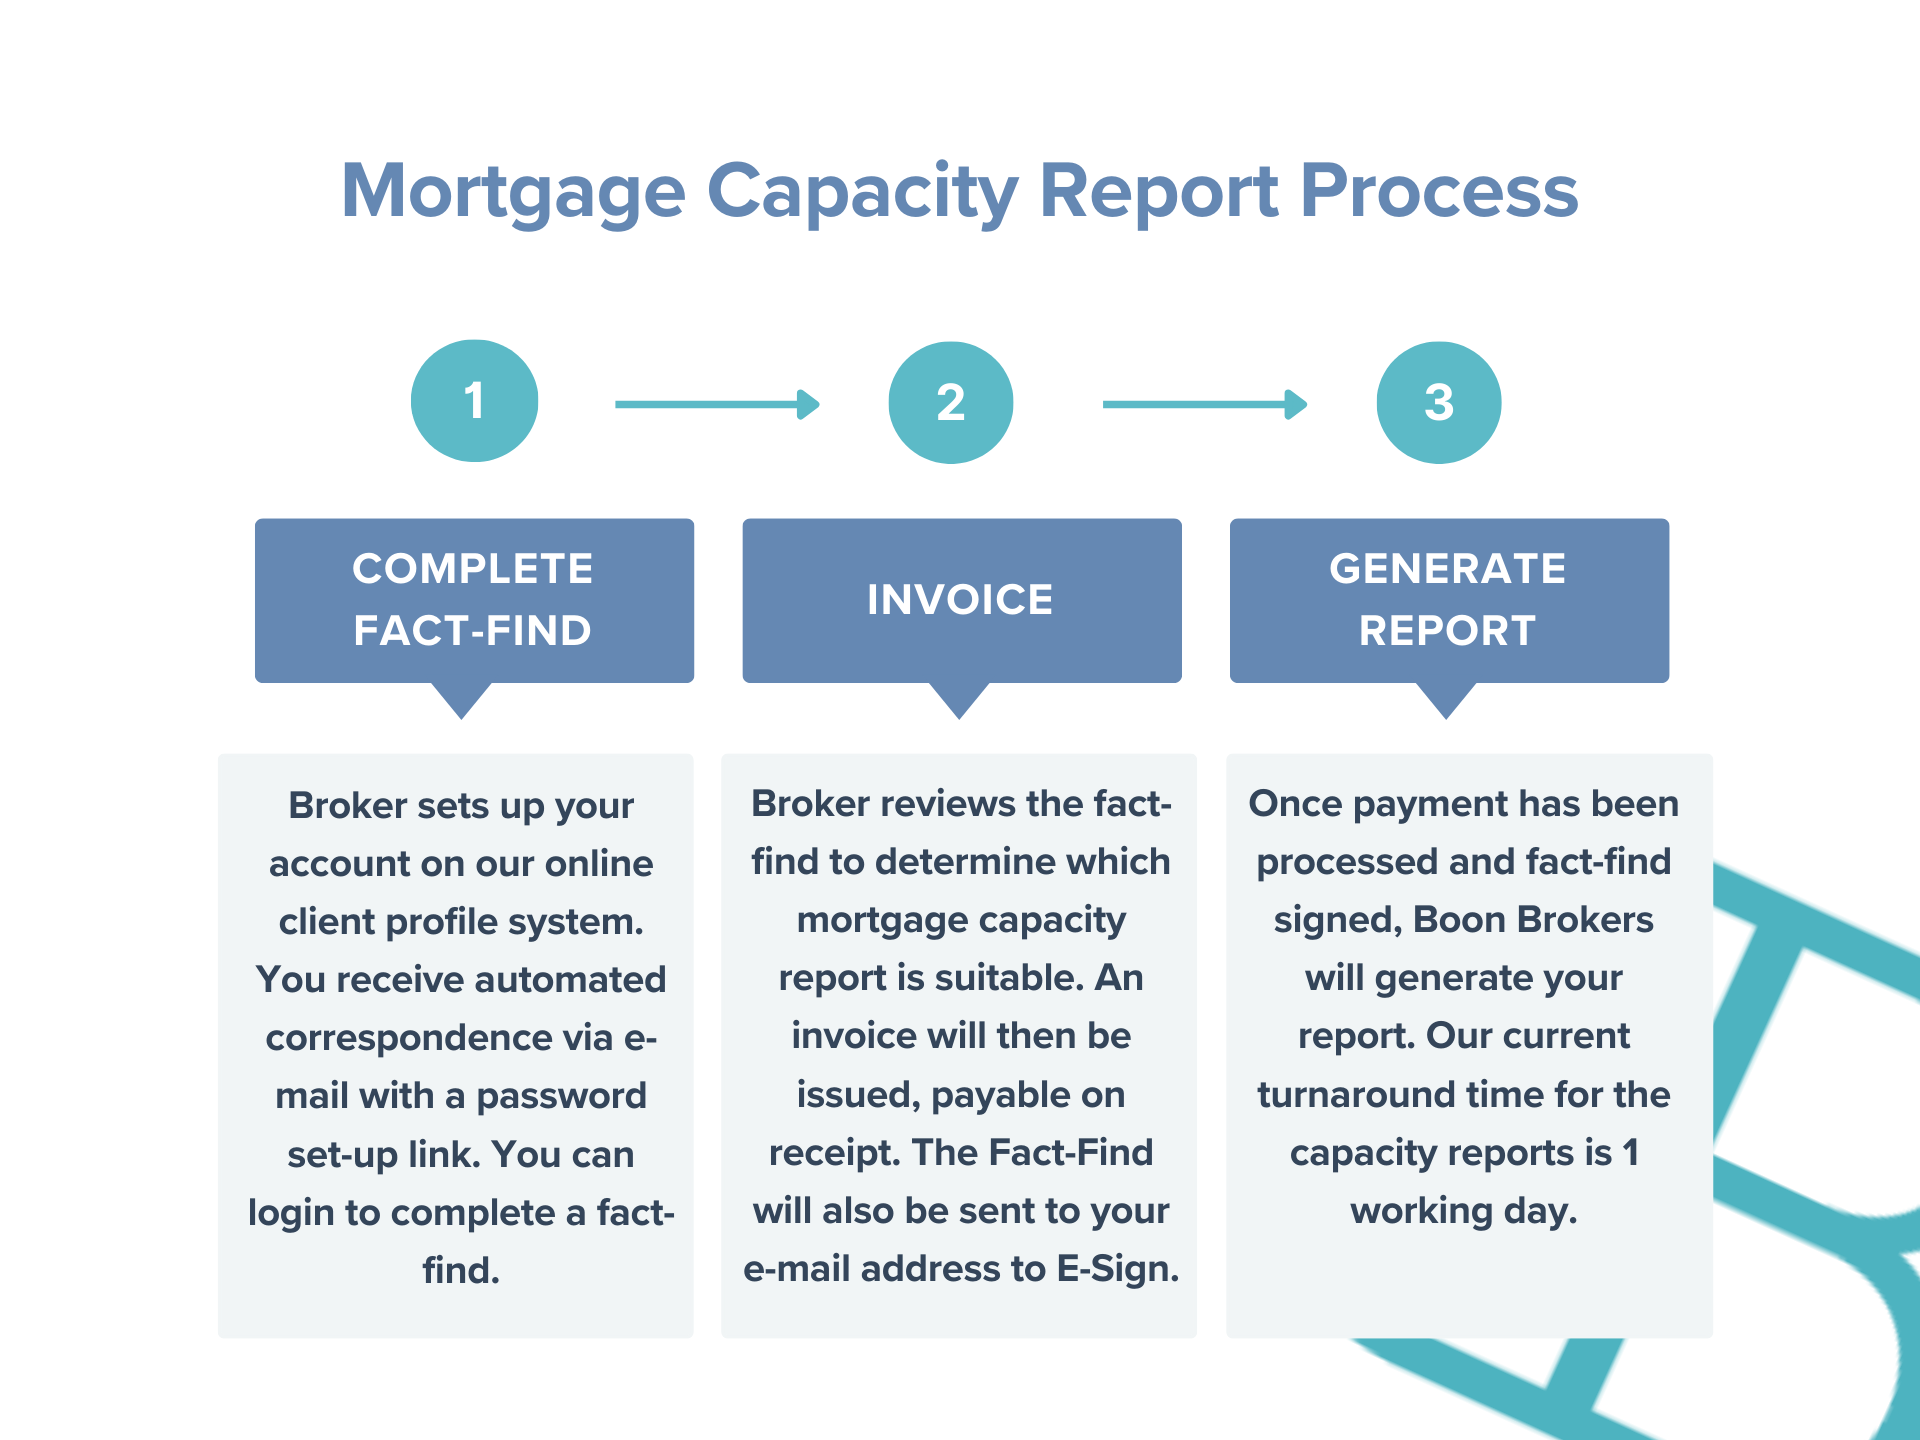 process of getting mortgage capacity report